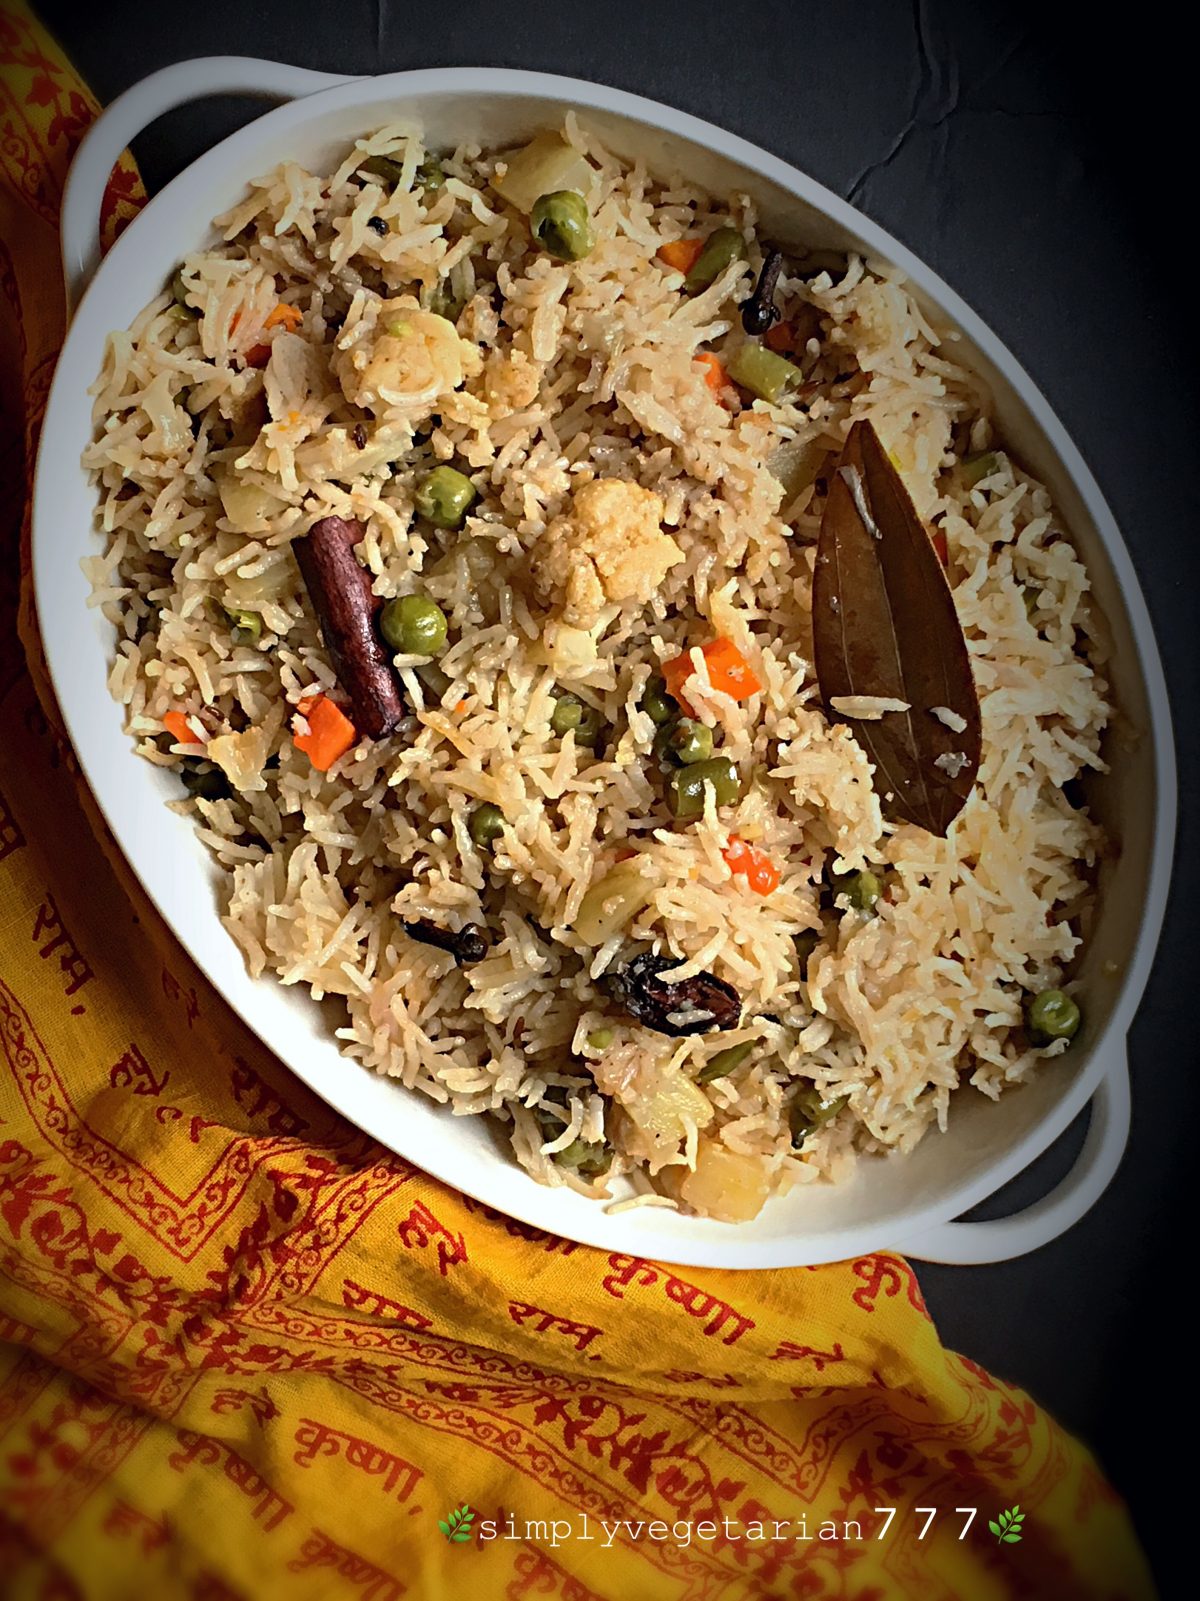 Vegetable Pulav Instant Pot Recipe is perfect for all the Pulav and Instant Pot Fans. You will get perfect texture Pulav every time, when cooked in Instant Pot. It is an easy, simple and efficient method. cooking in Pan & Pressure Cooker methods given too. #vegetablepulav #vegetablepilaf #vegetablepulao #instantpotindianrecipes #instantpotveganindianrecipes #instantpotglutenfreeindianrecipes #instantpotricerecipes #instantpotpulao #instantpotpulav #instantpotpilaf #instantpoteasyrecipes #ricerecipes